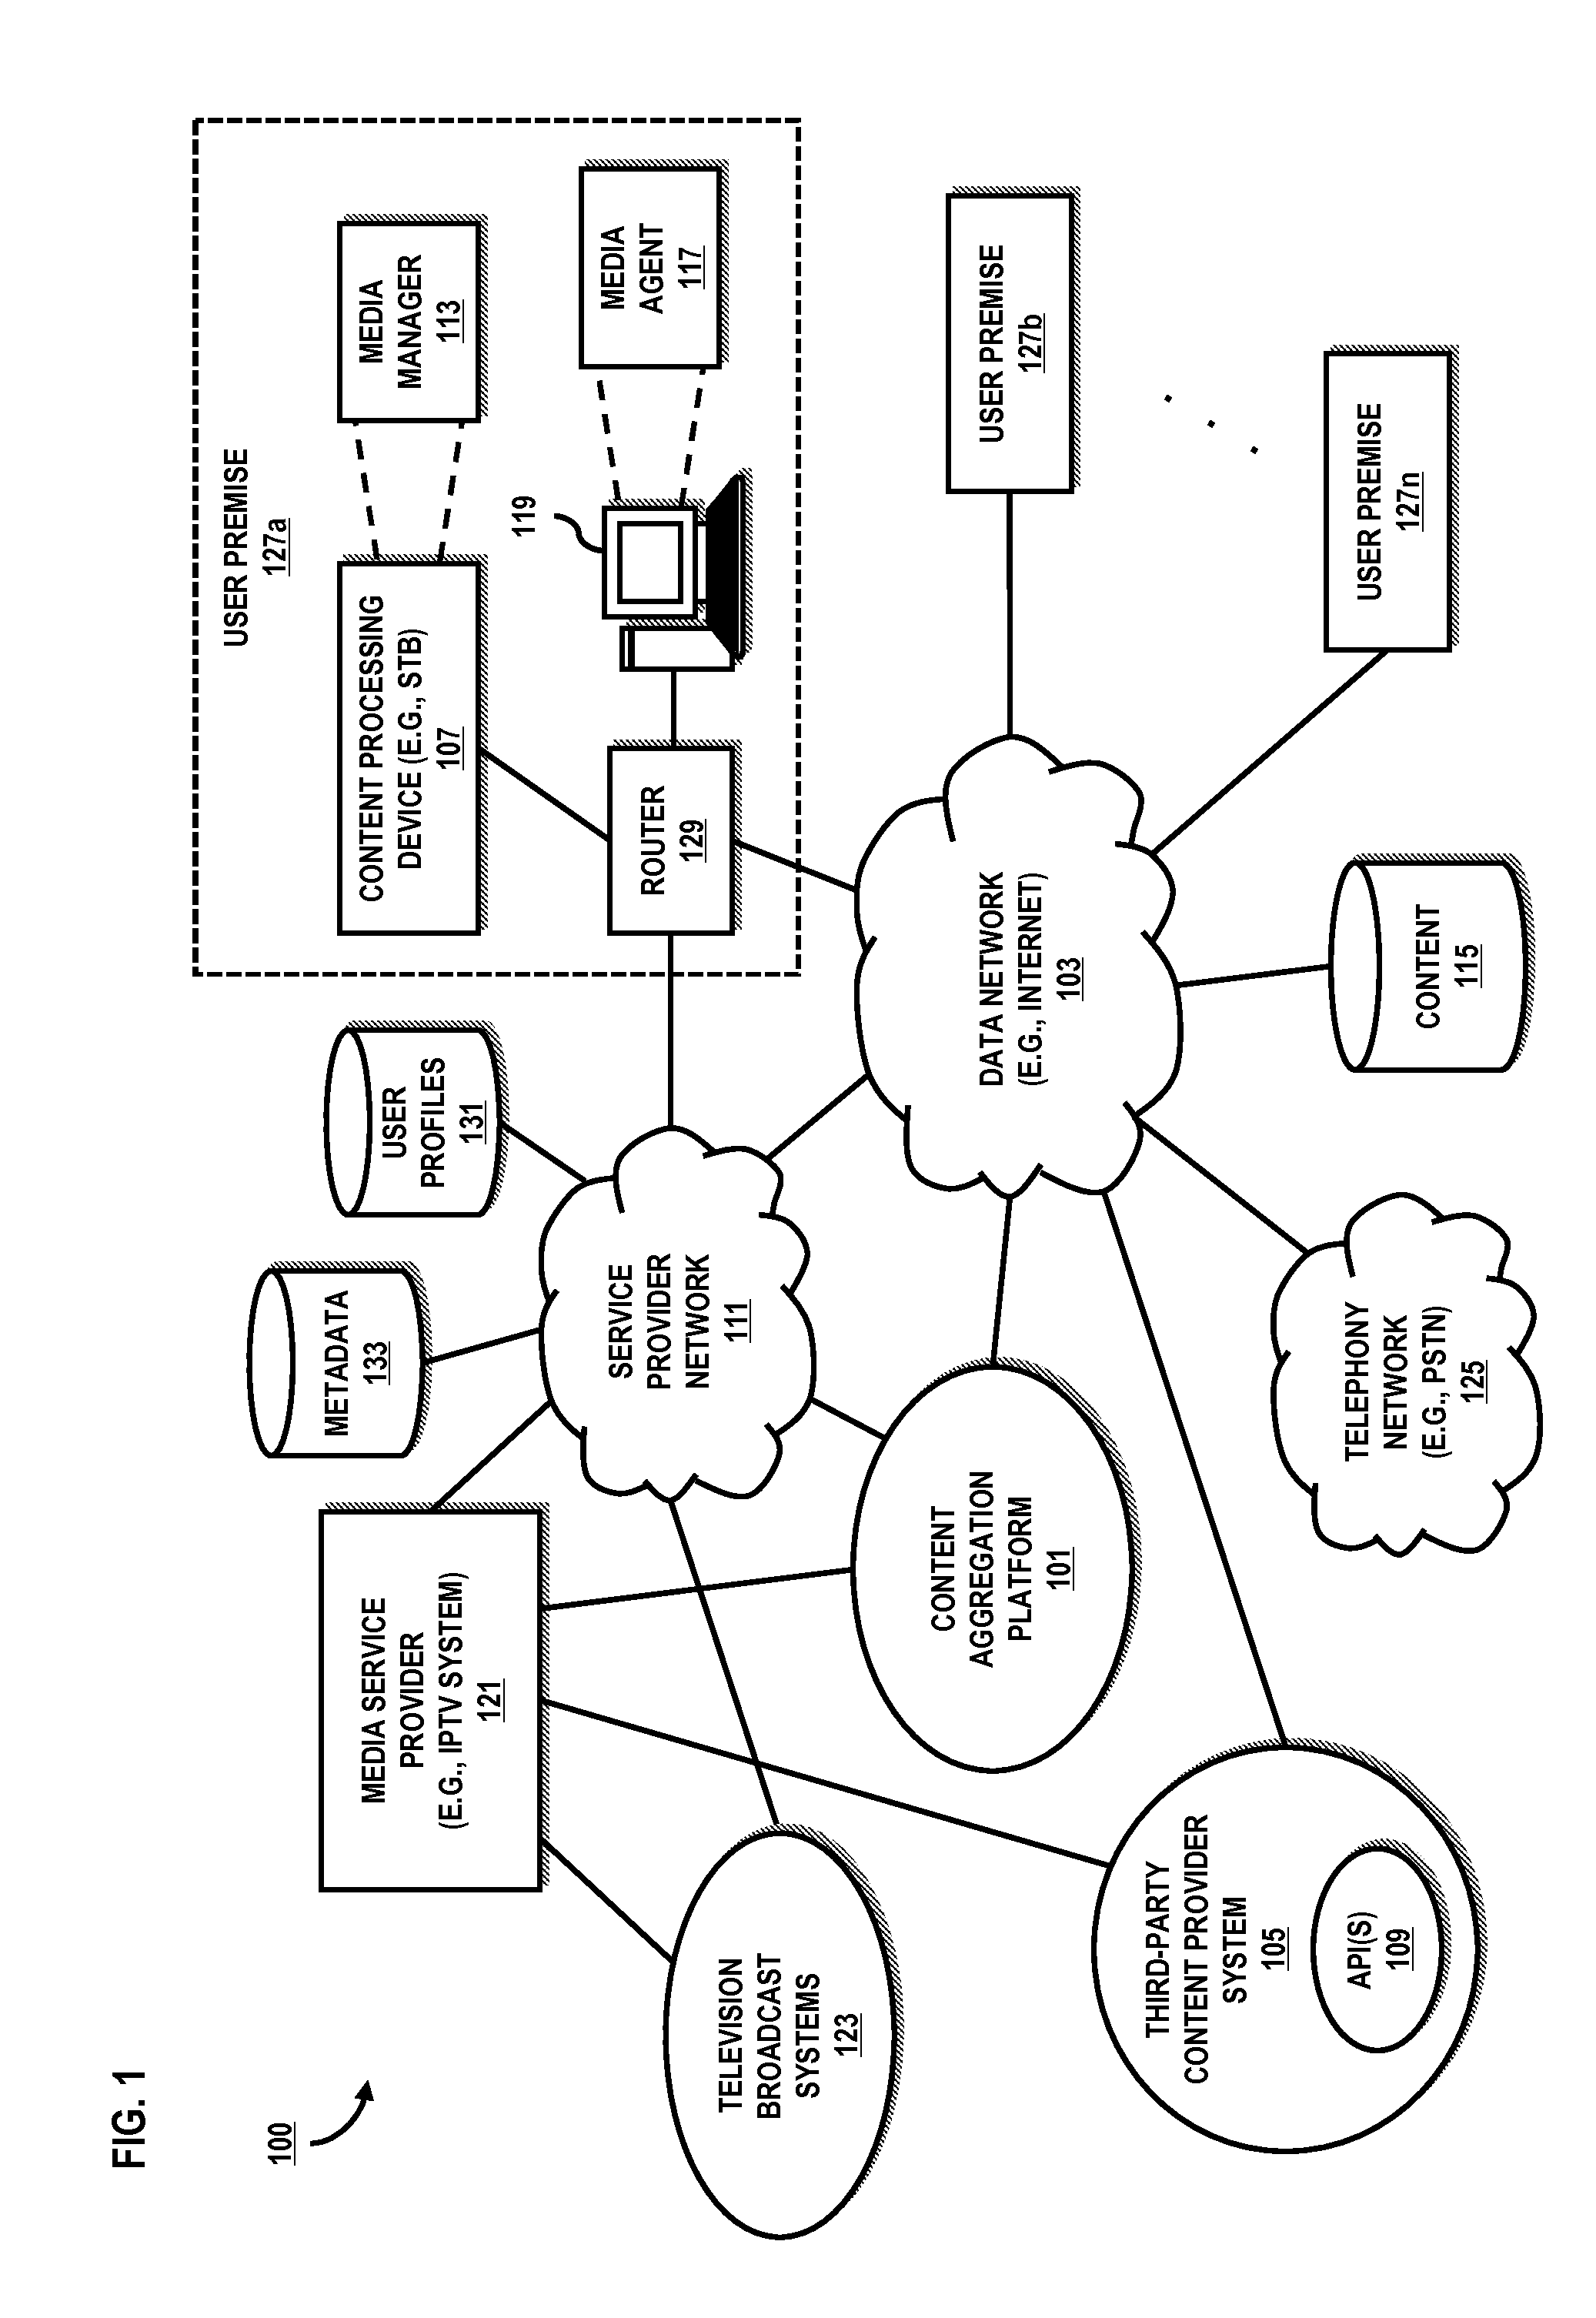 Method and apparatus for providing content aggregation in support of virtual channels